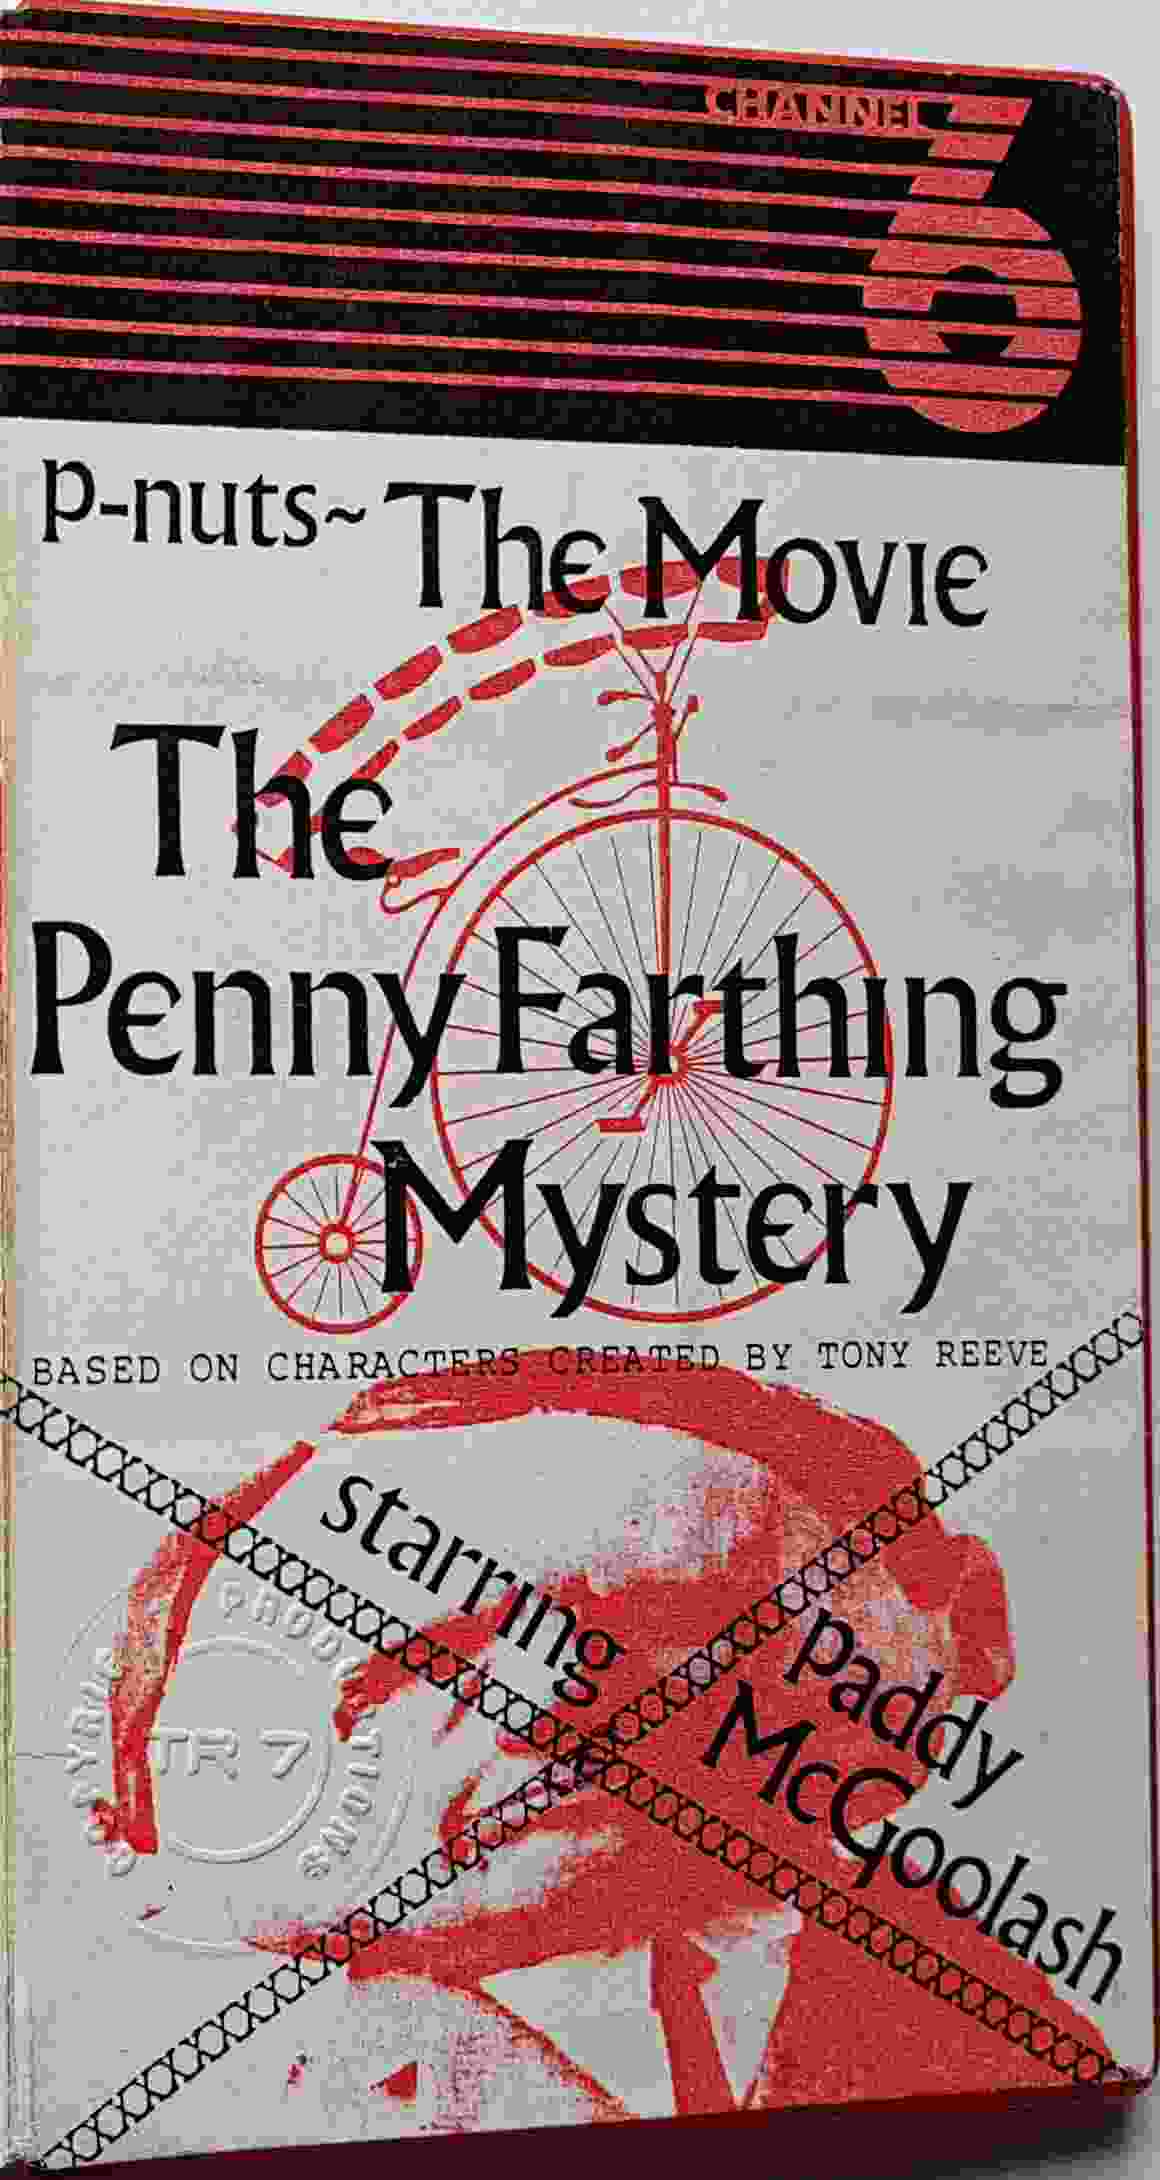 Picture of videos-PM-TPFM Paddy McGoolash - The penny farthing mystery by artist Unknown from ITV, Channel 4 and Channel 5 library